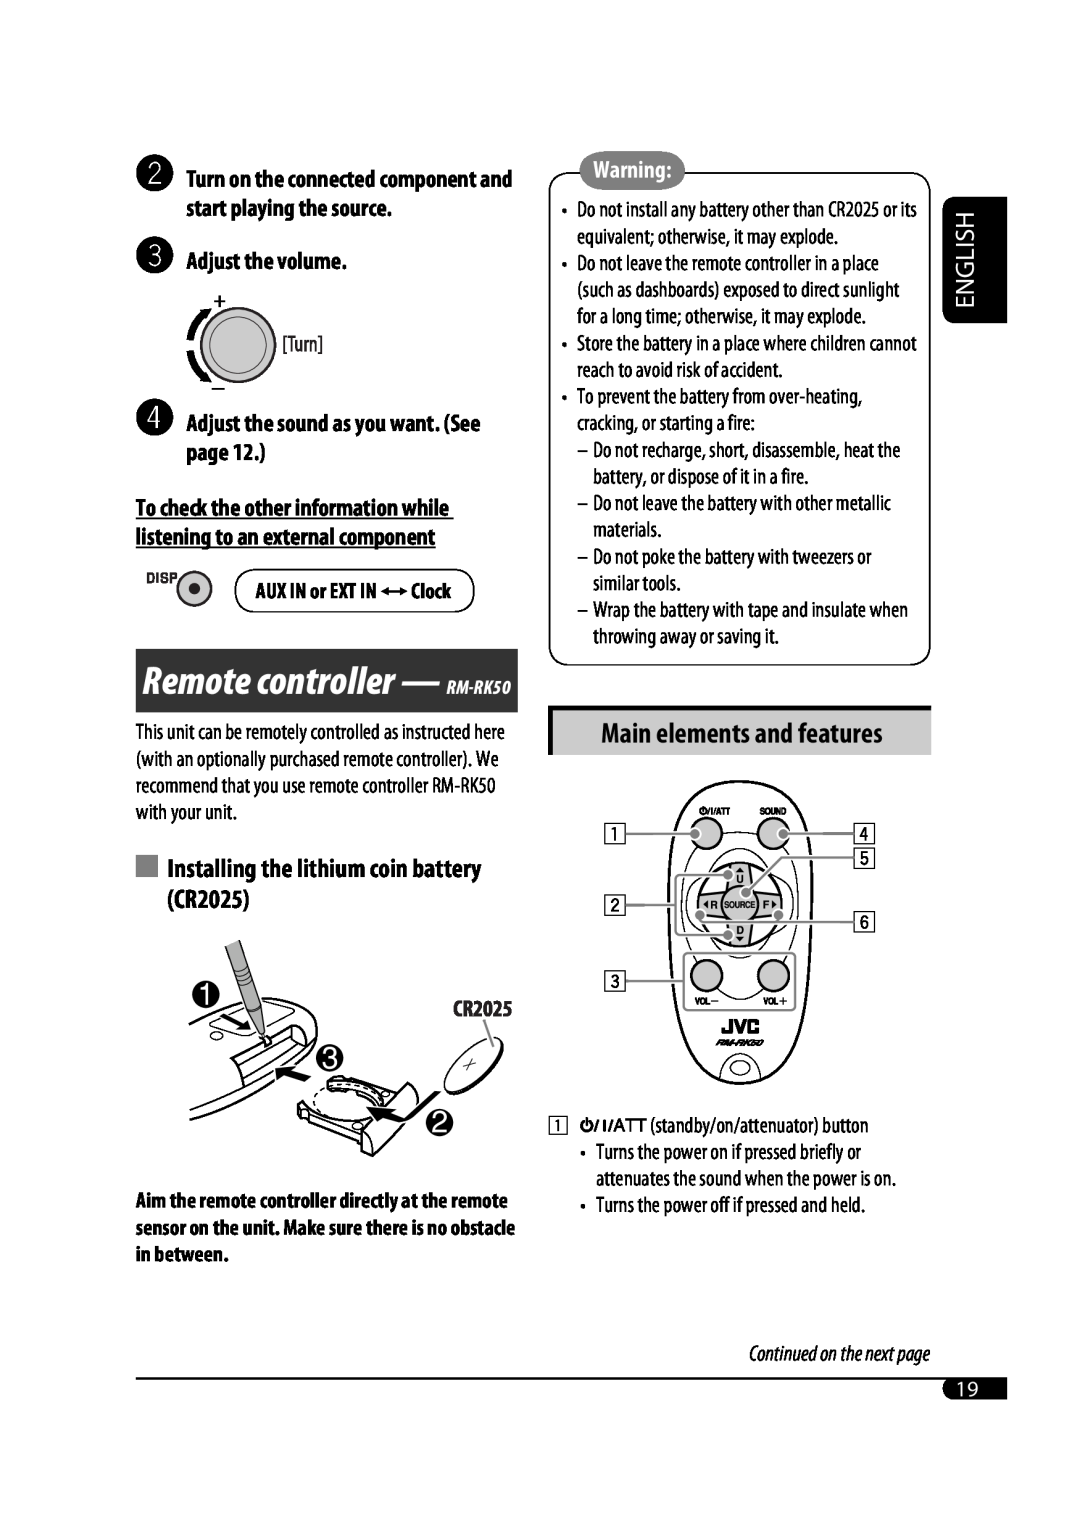 JVC KD-G431 manual Remote controller - RM-RK50, Main elements and features, Installing the lithium coin battery CR2025 